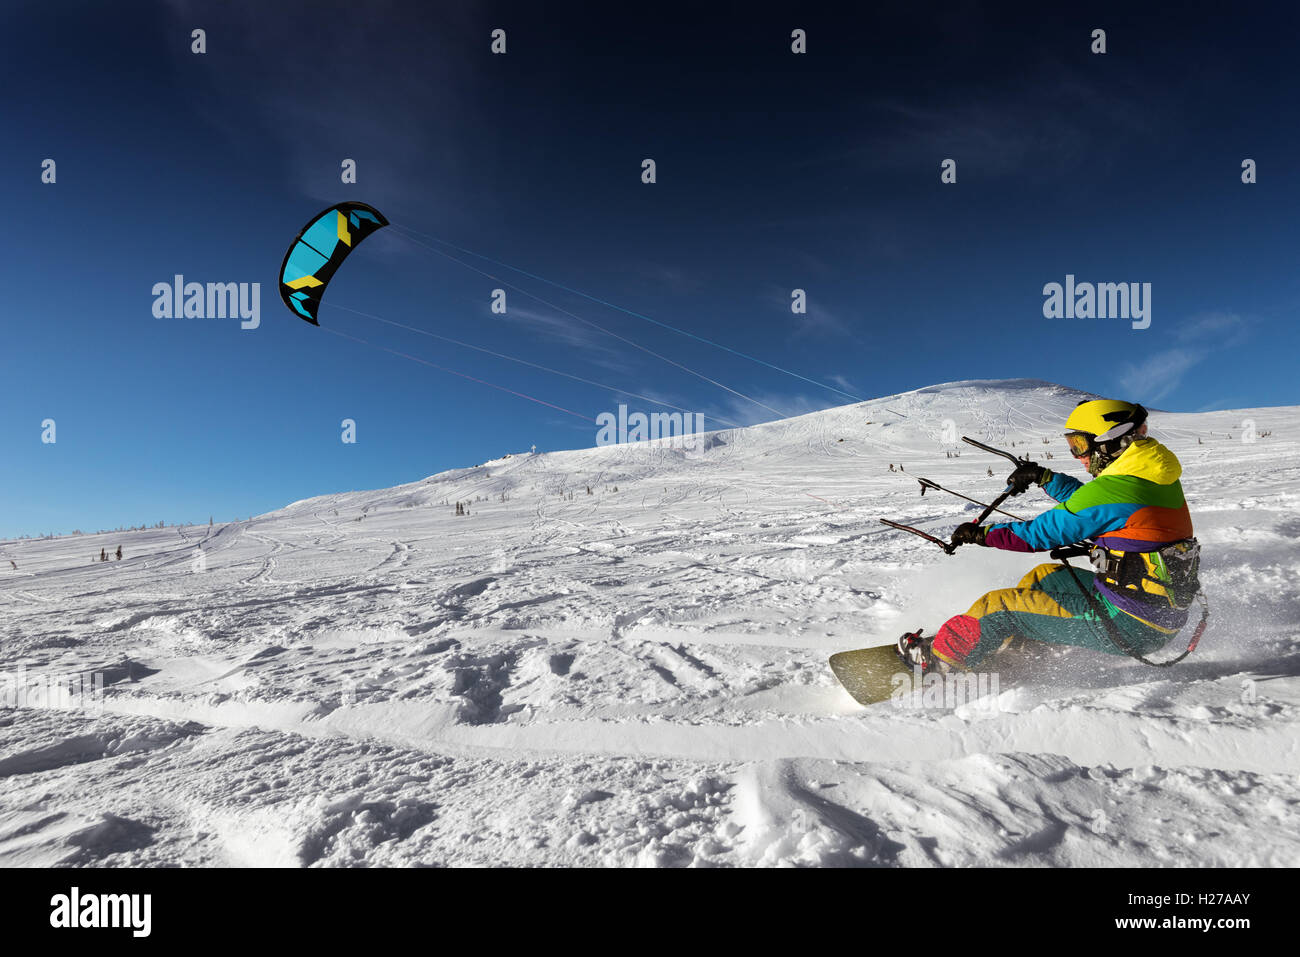 Snowboarder skydives on blue sky backdrop in snow mountains Stock Photo